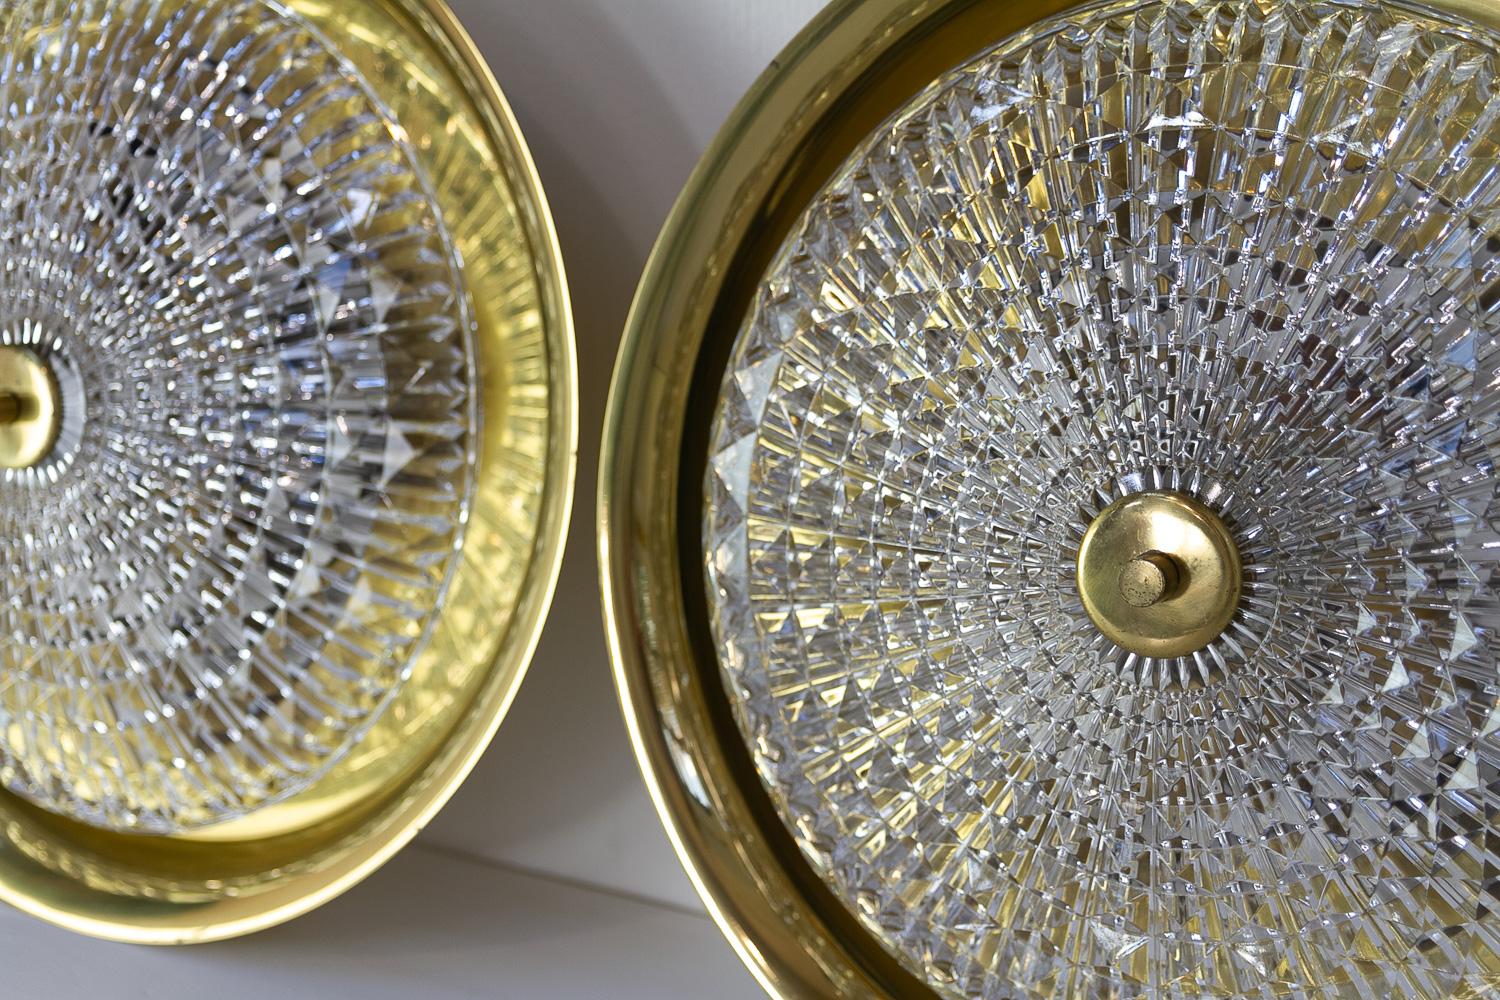 Orrefors Brass Wall or Ceiling Lamps by Fagerlund for Lyfa, 1960s. Set of 2. For Sale 1